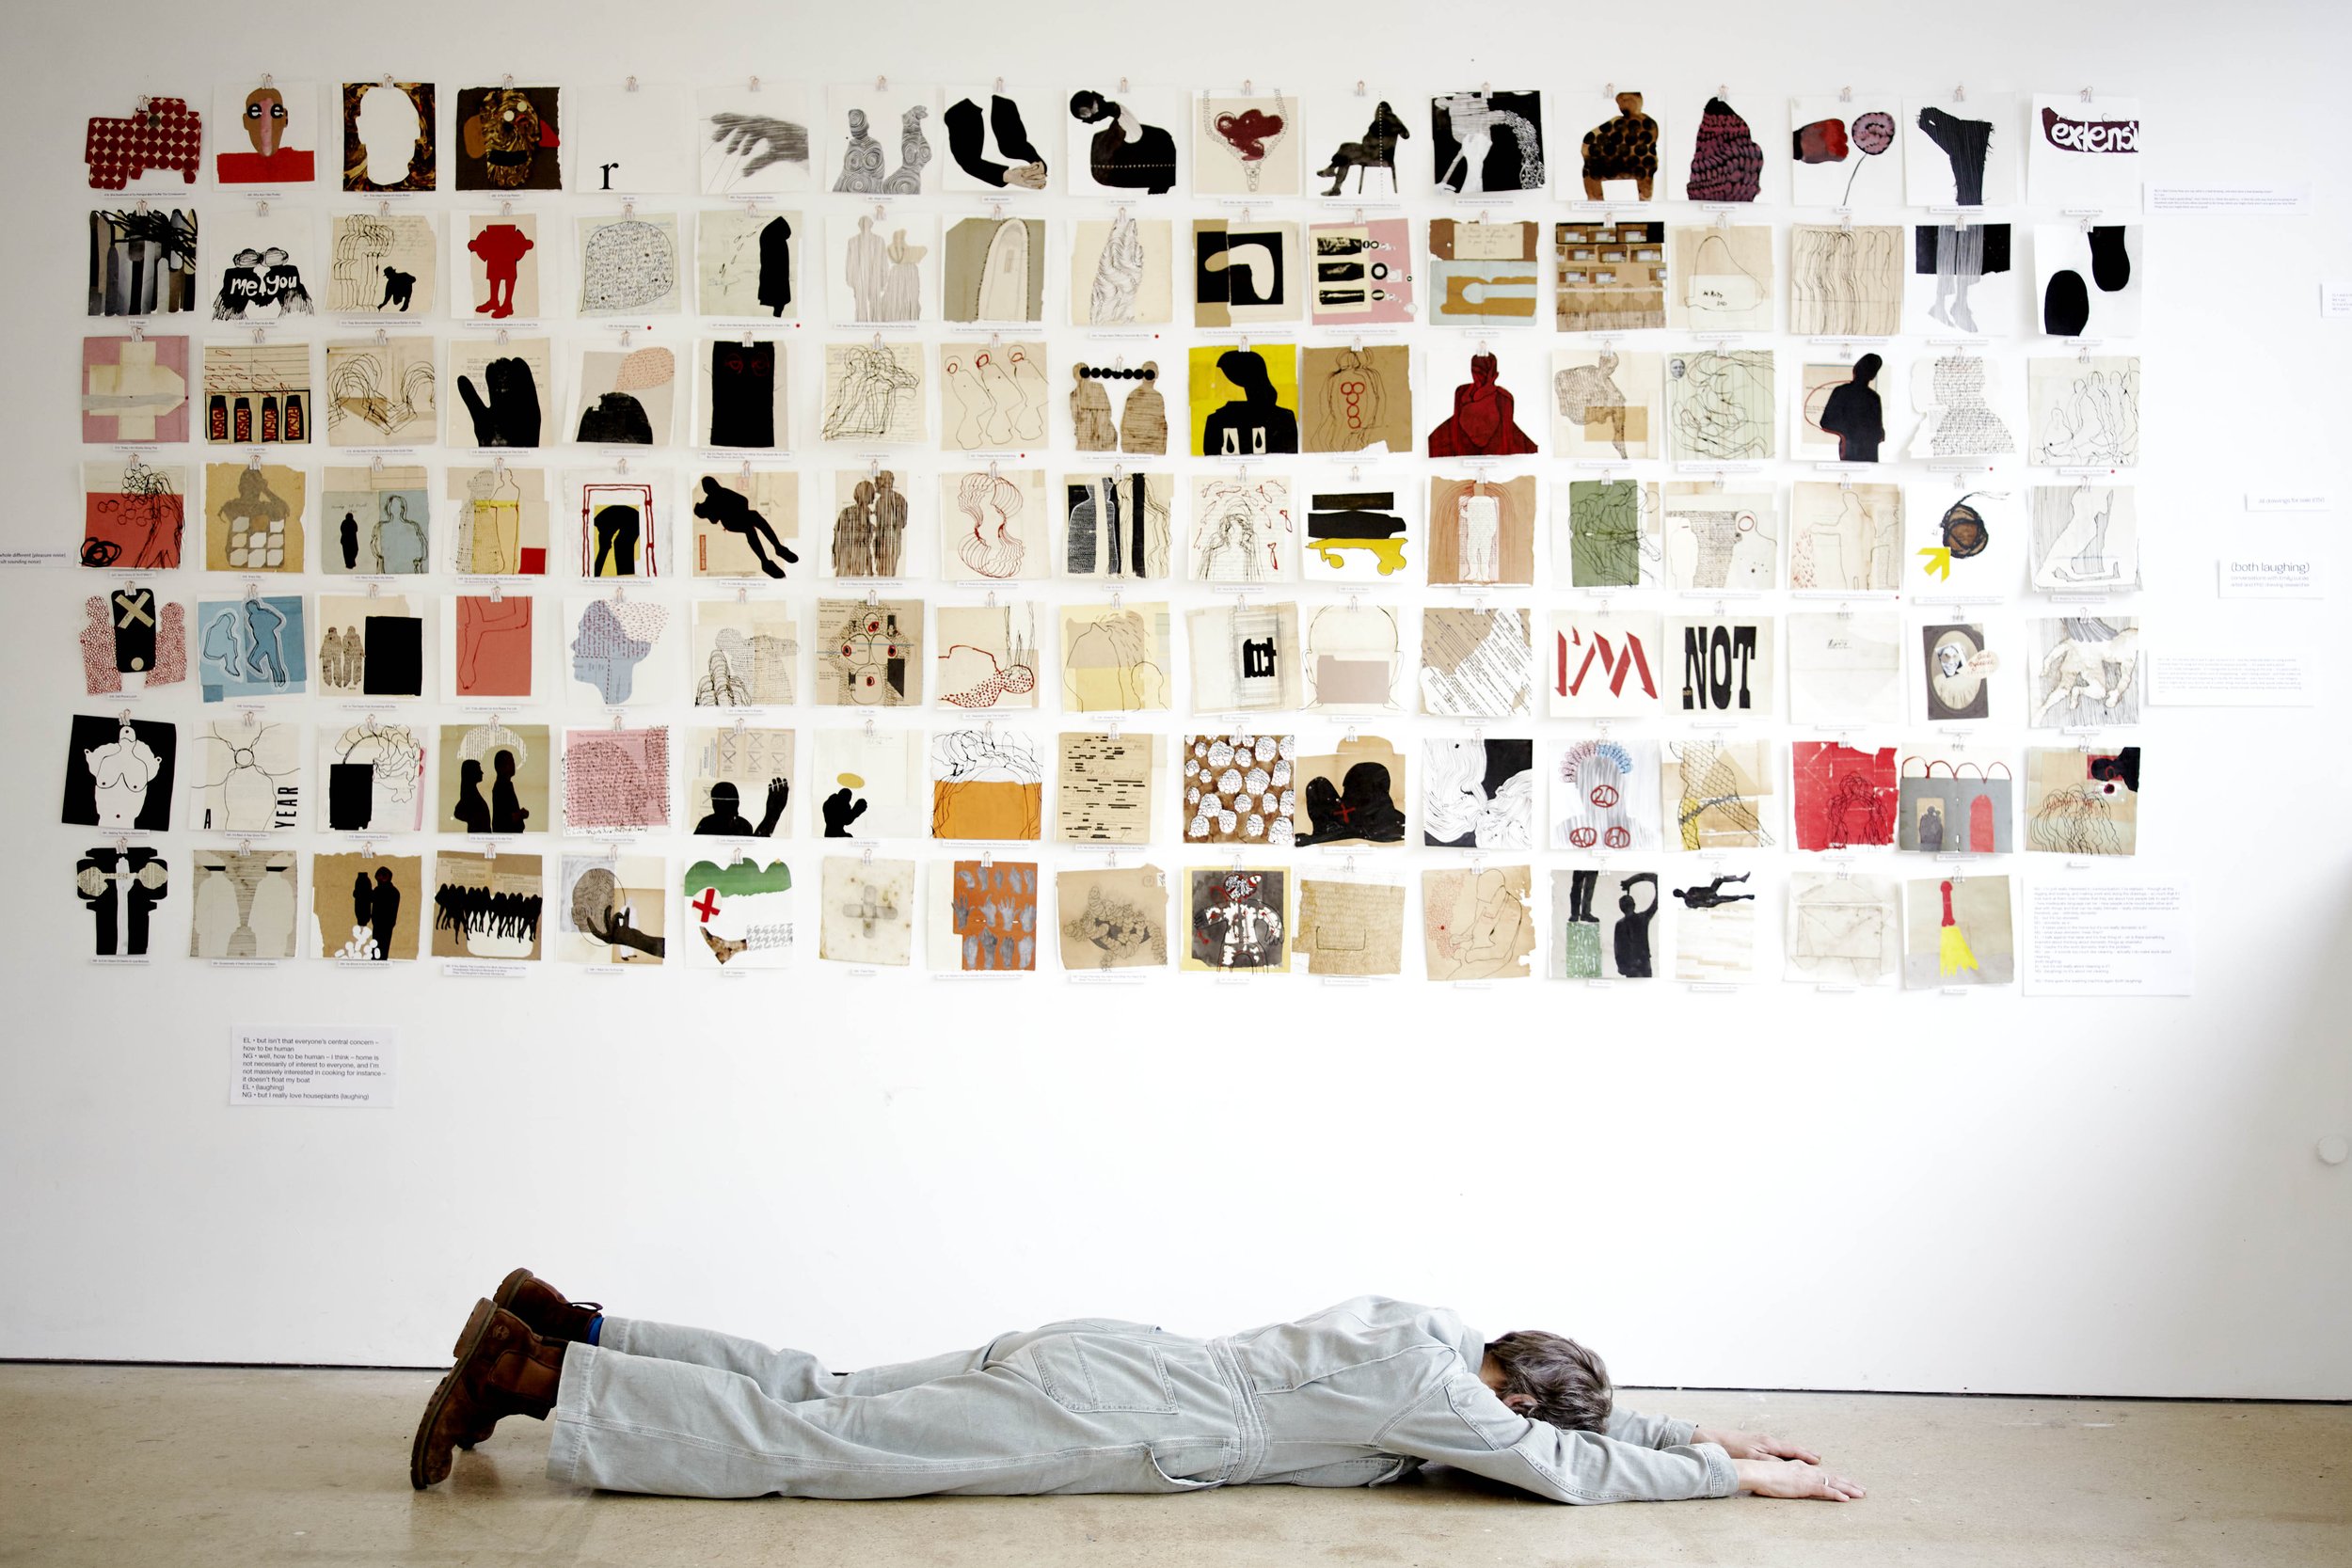 Photograph by Hatty Frances Bell of Nick Grellier lying on the floor in front of her artwork at SVA in Stroud